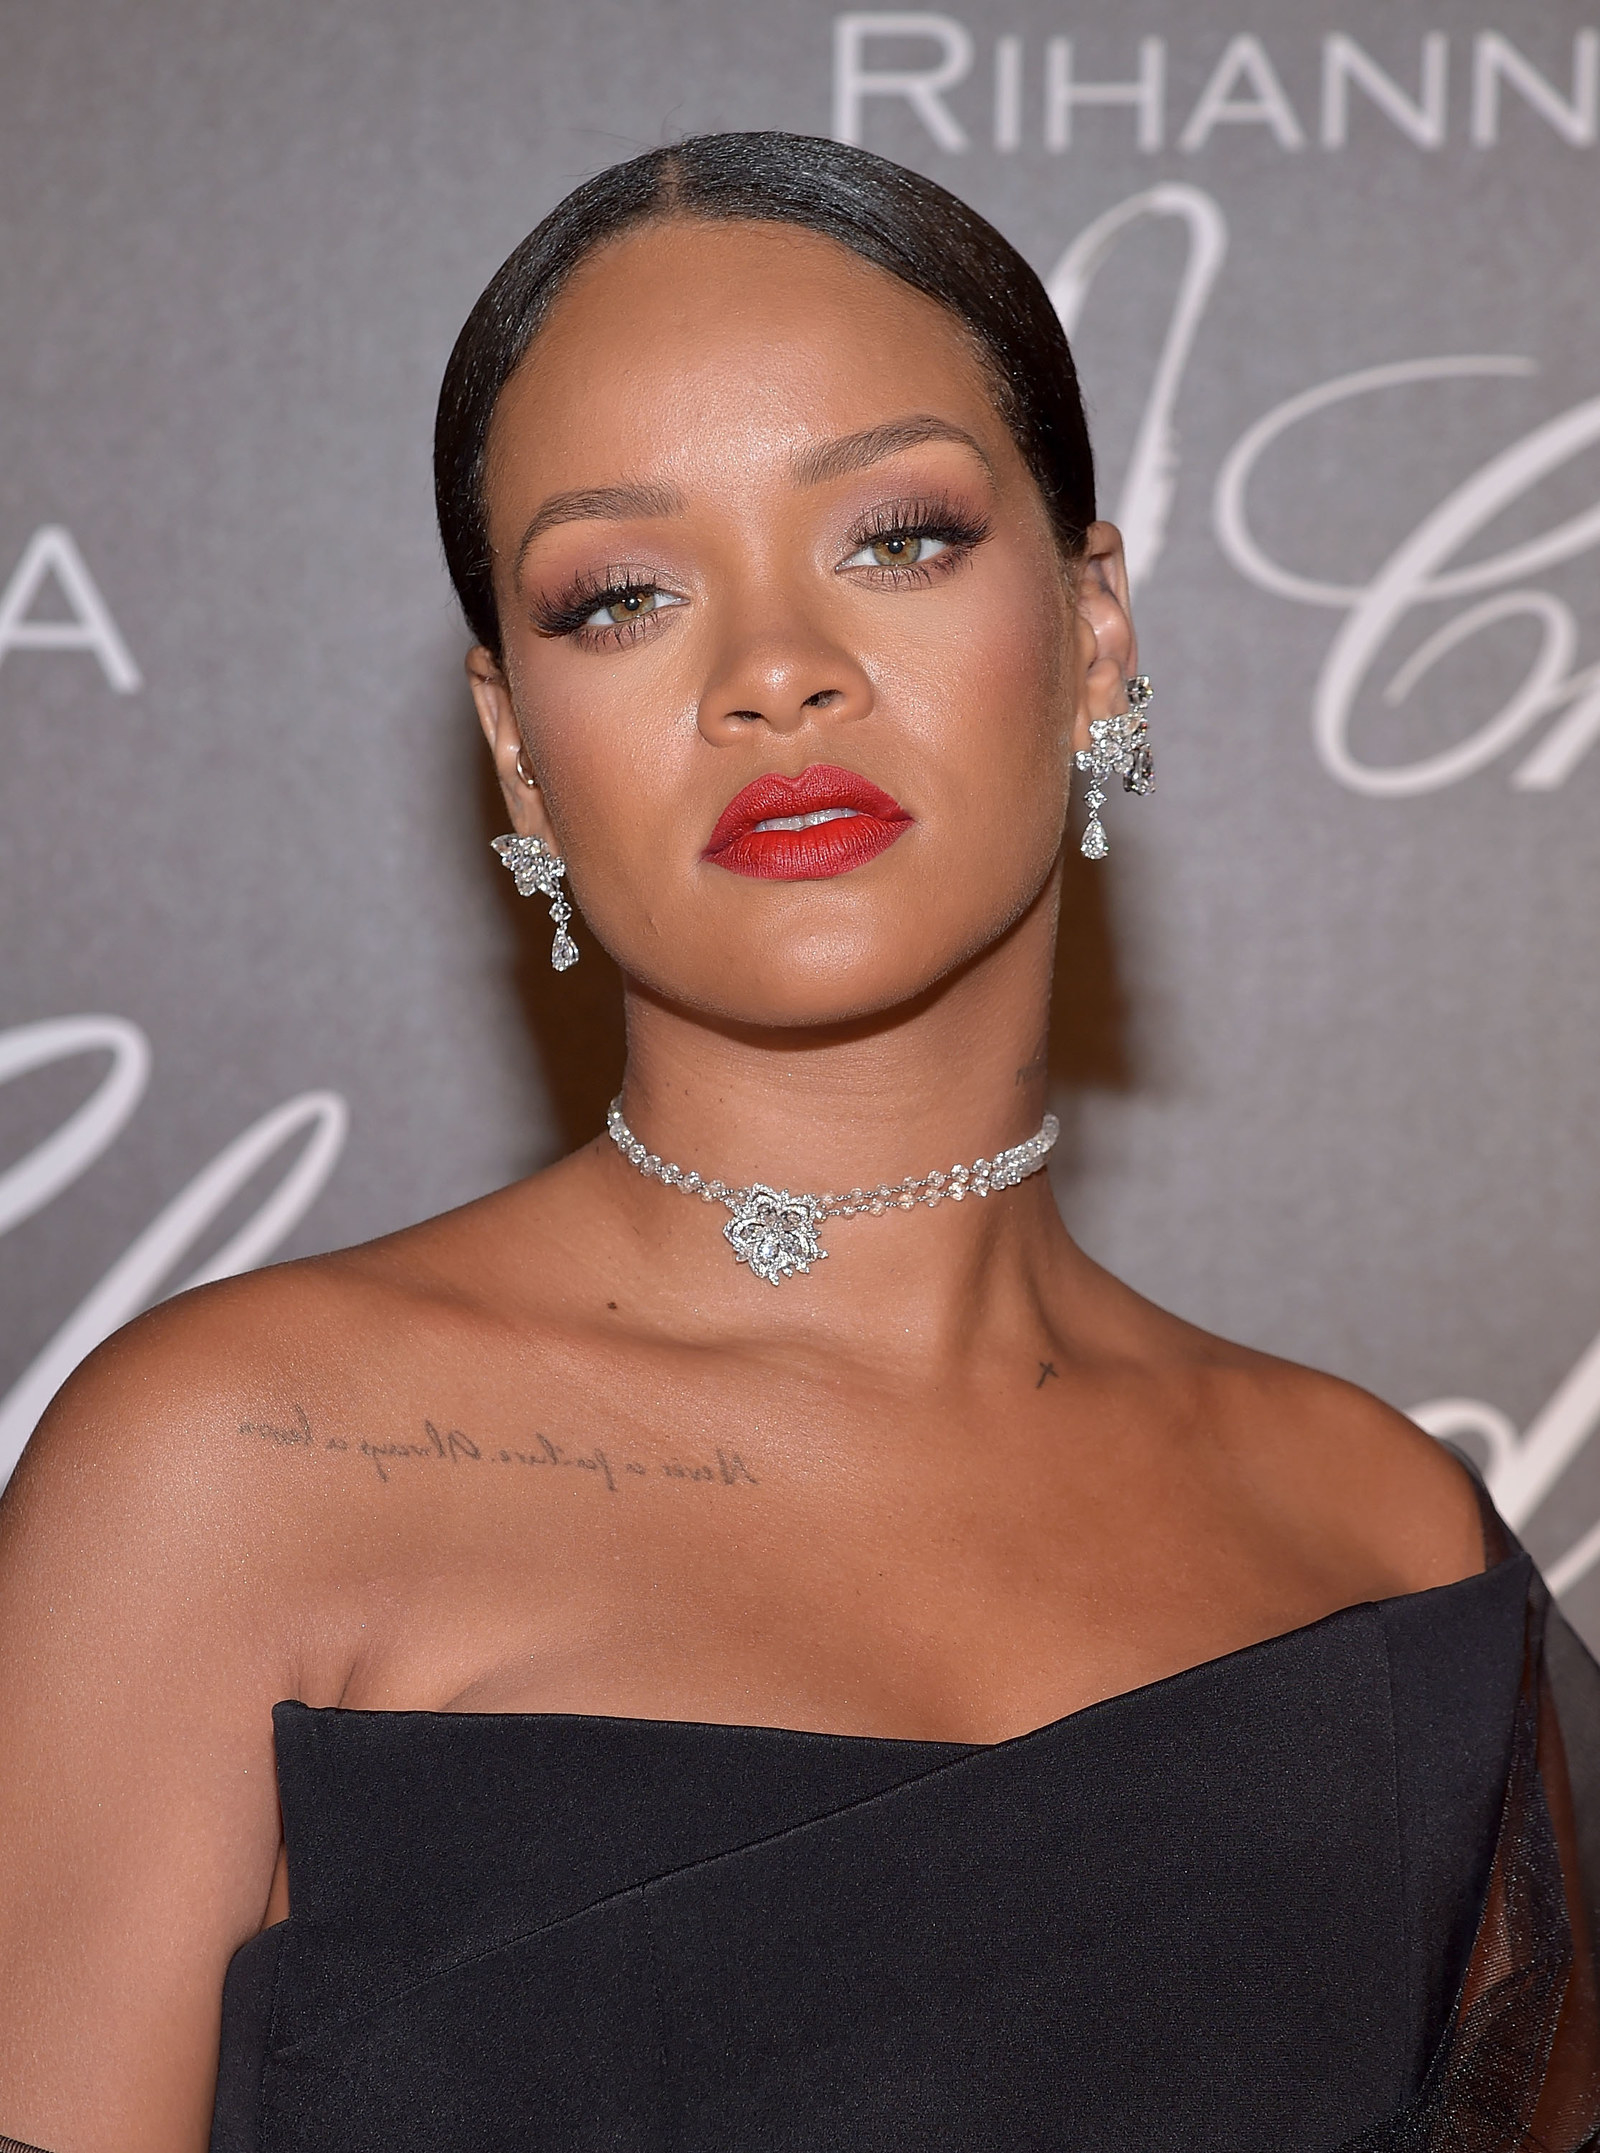 Rihanna Conquered The Fashion World And Now She's Ready To Take Over Beauty